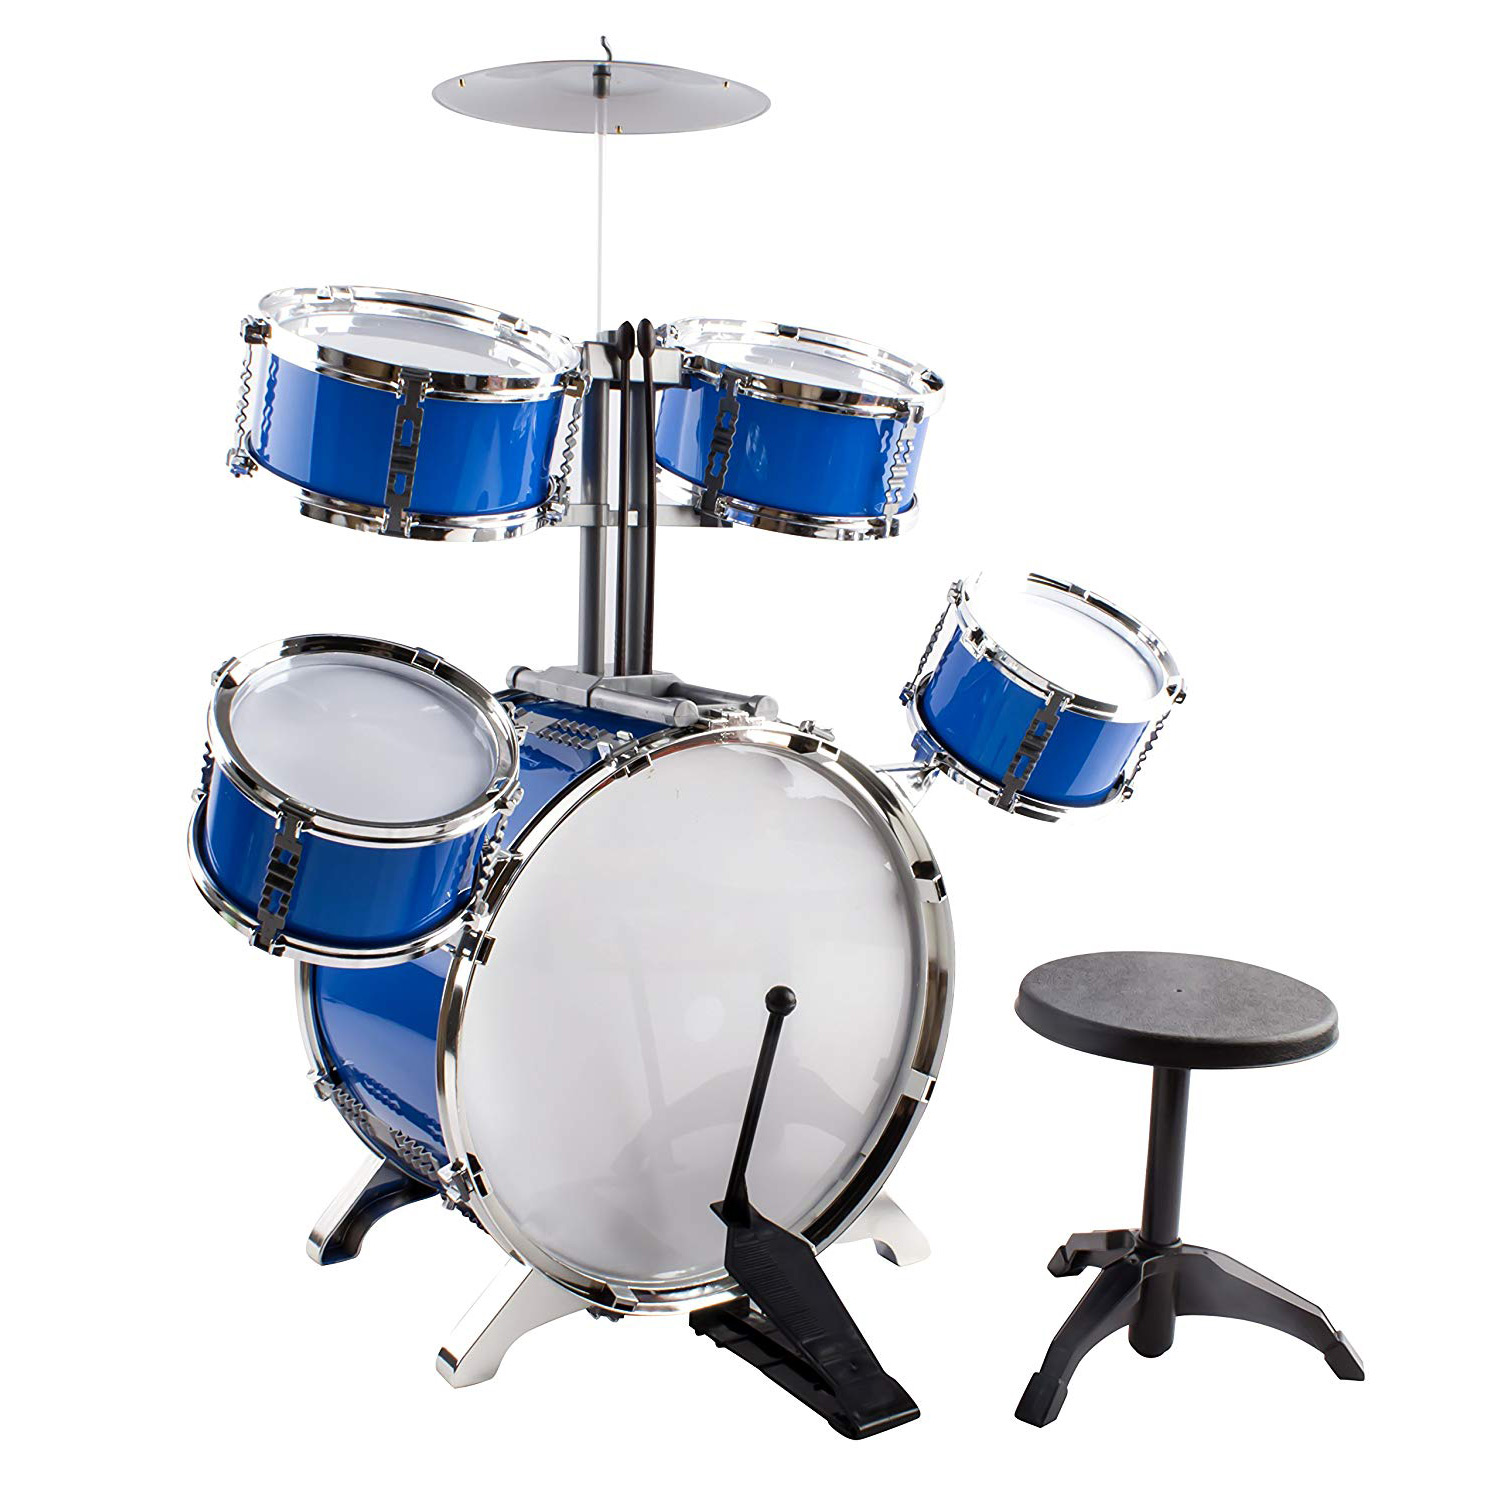 Classic Rhythm Toy Jazz Drum Big XXXL Size Children Kid's Musical Instrument Playset With 5 Drums, Cymbal, Chair, Kick Pedal, And Drumsticks A Perfect Beginner Set For Kids (Blue)